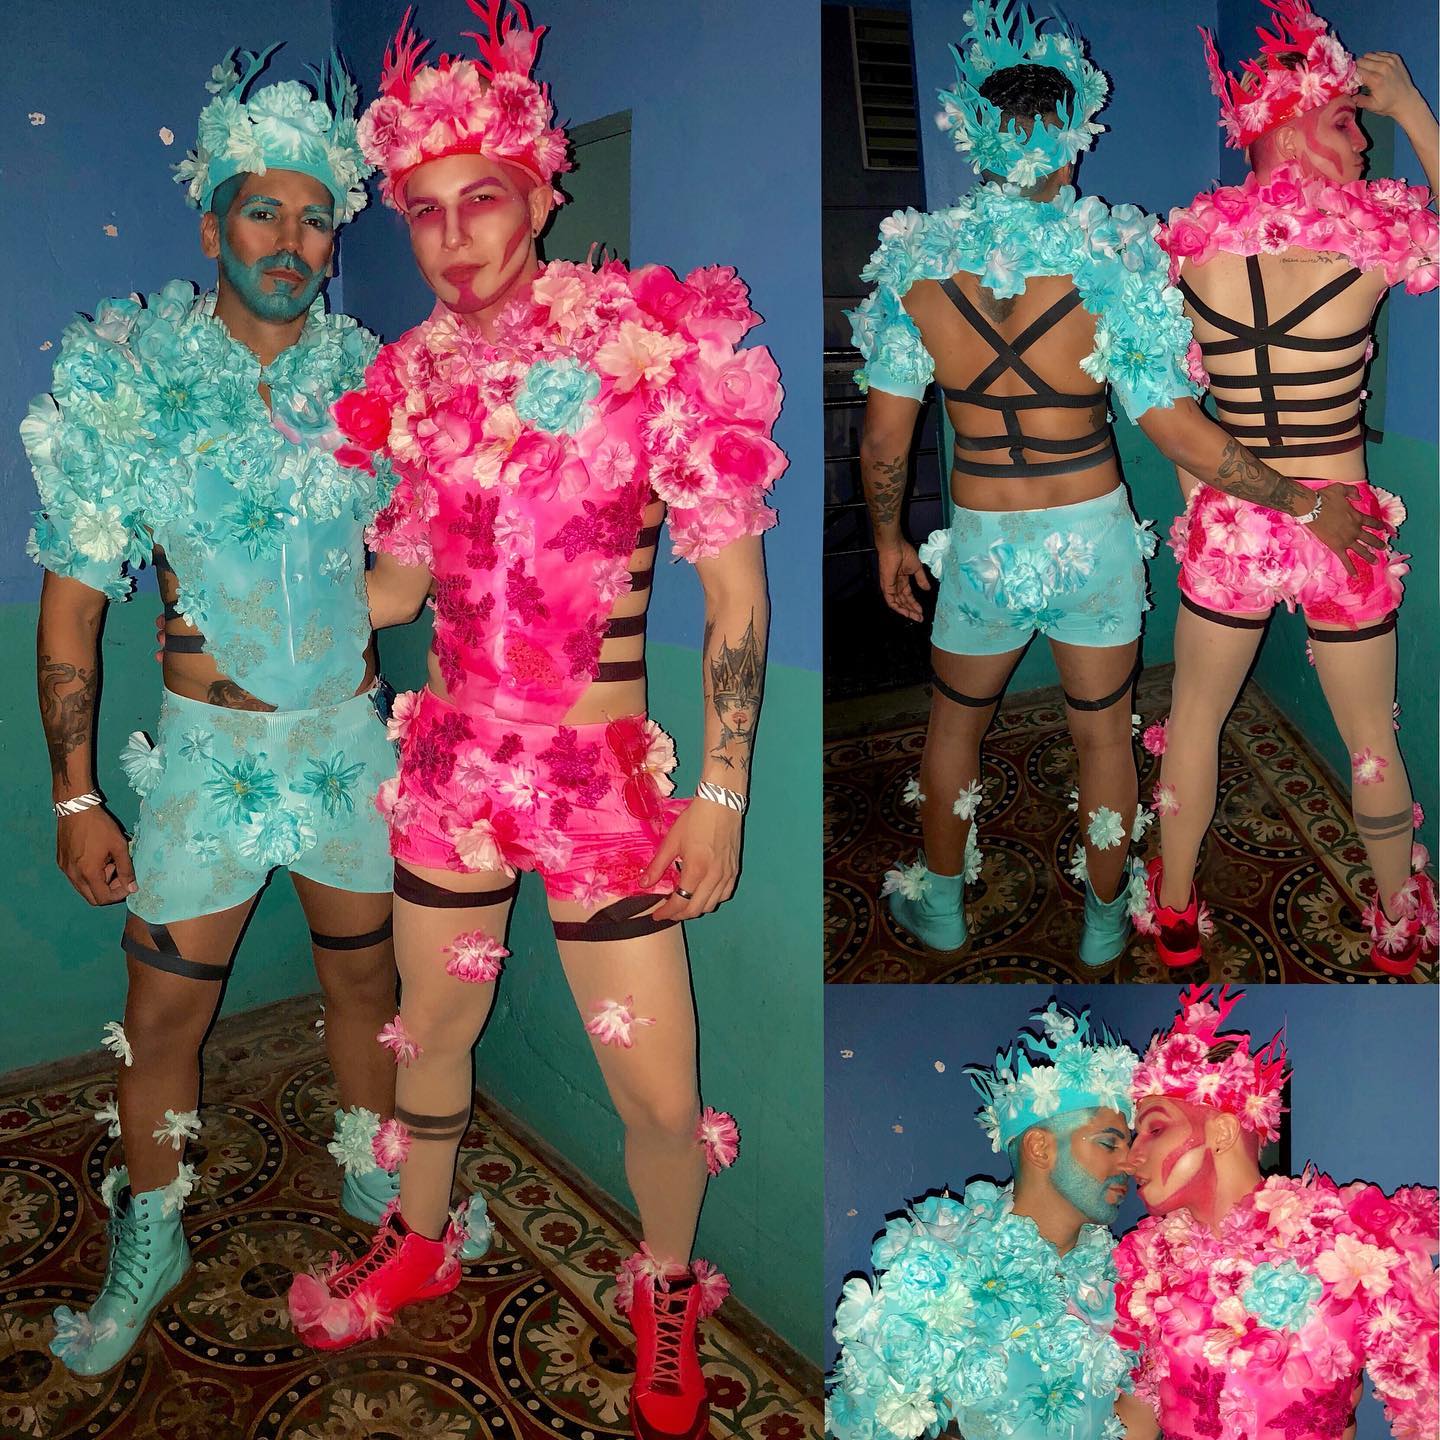 Men in flower costumes for halloween party.